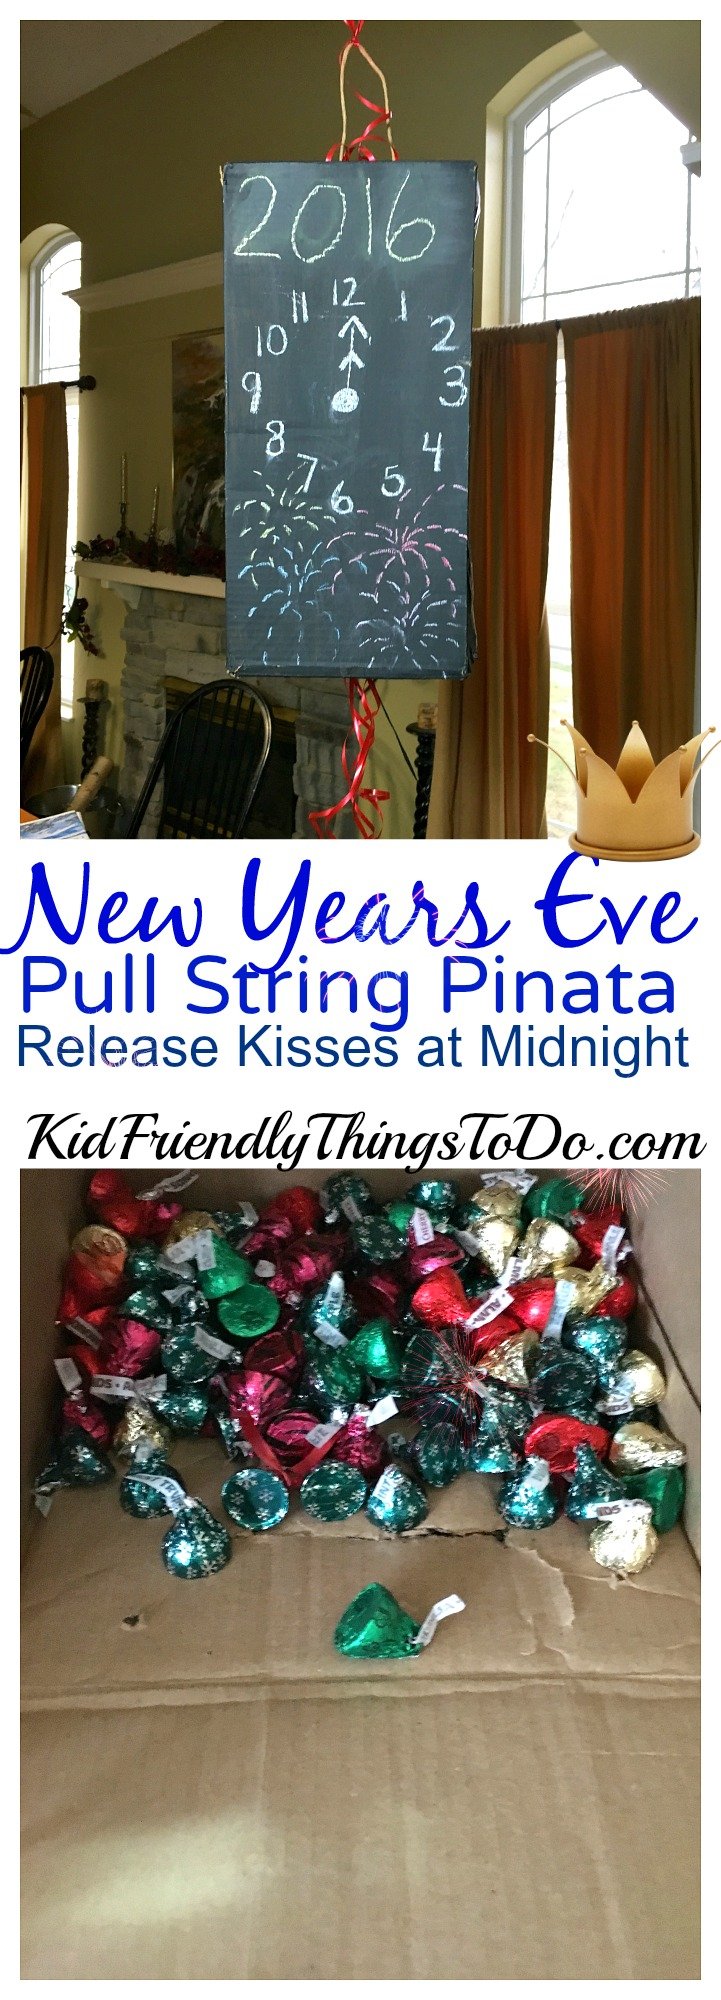 New Years Eve With Kids! DIY Pull String Pinata to release Kisses at Midnight - KidFriendlyThingsToDo.com